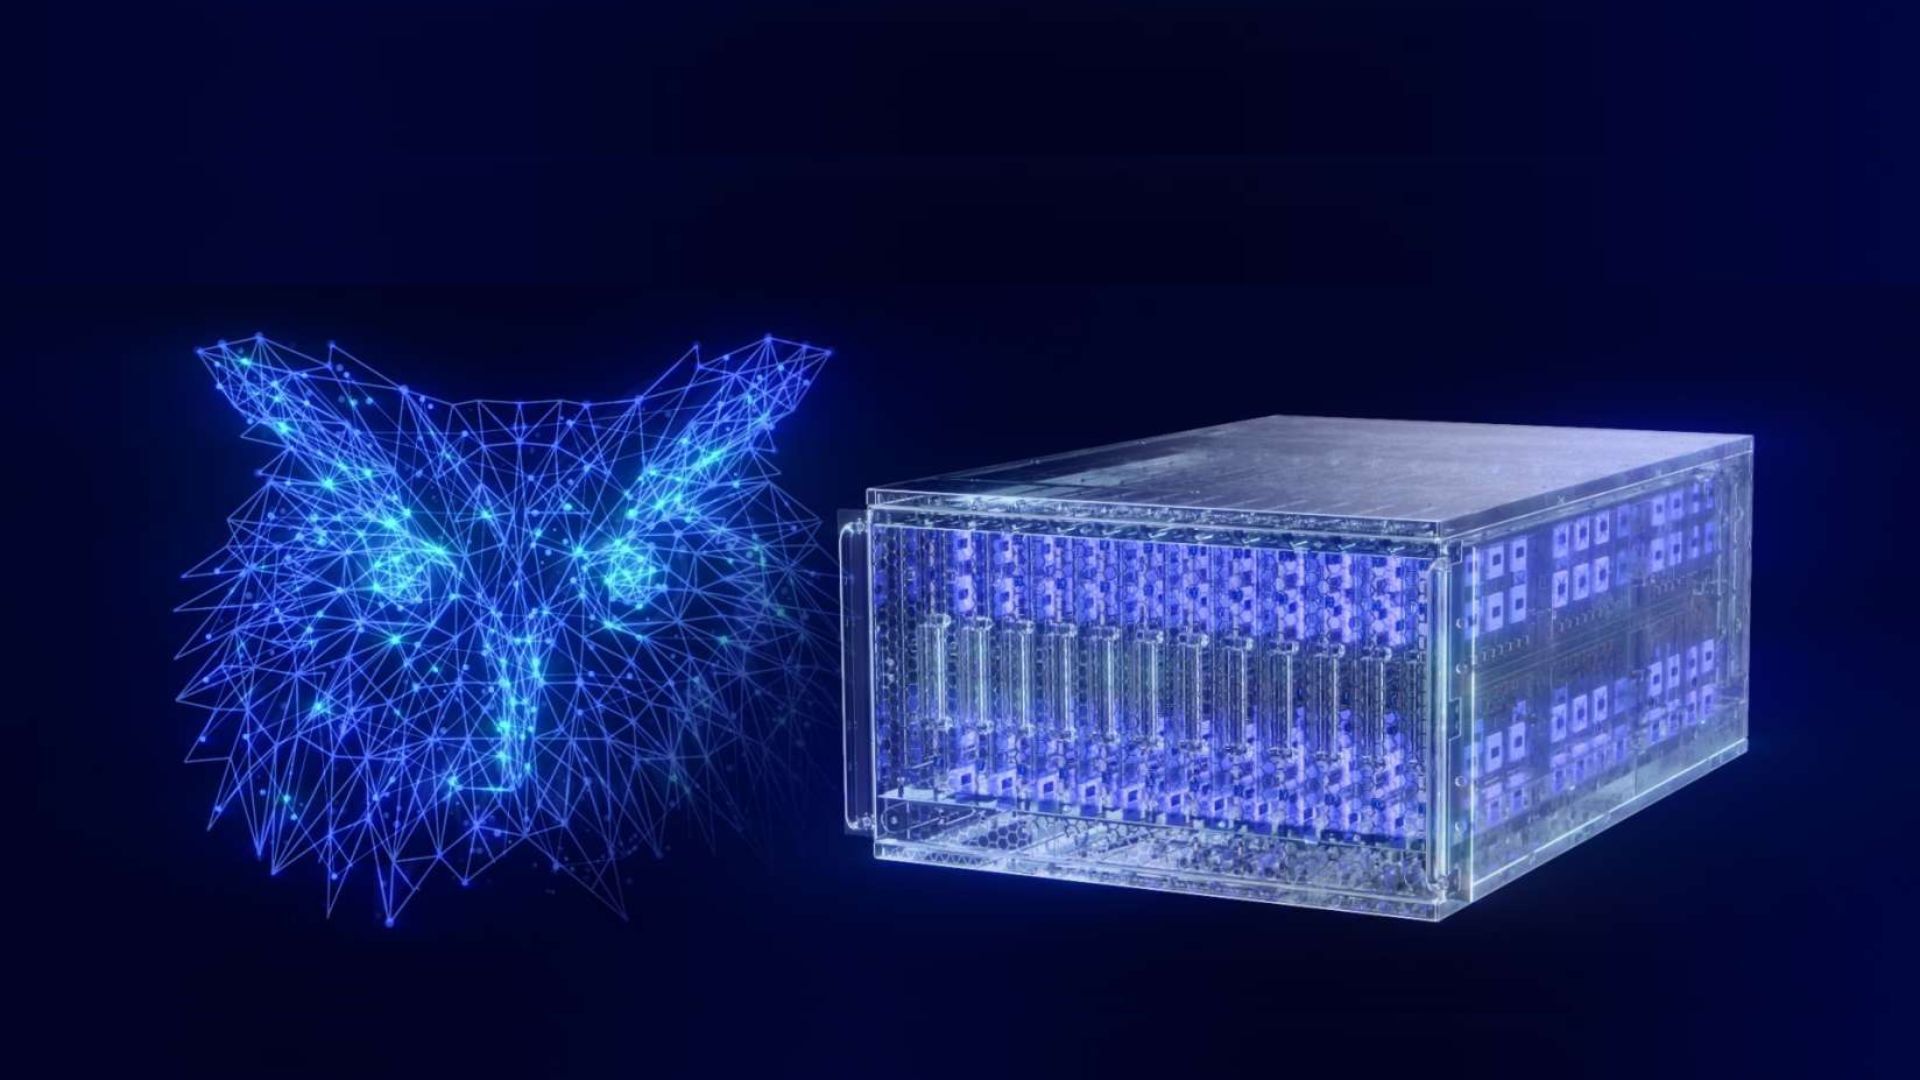 Intel unveils world’s largest human brain-like computer for faster AI [Video]